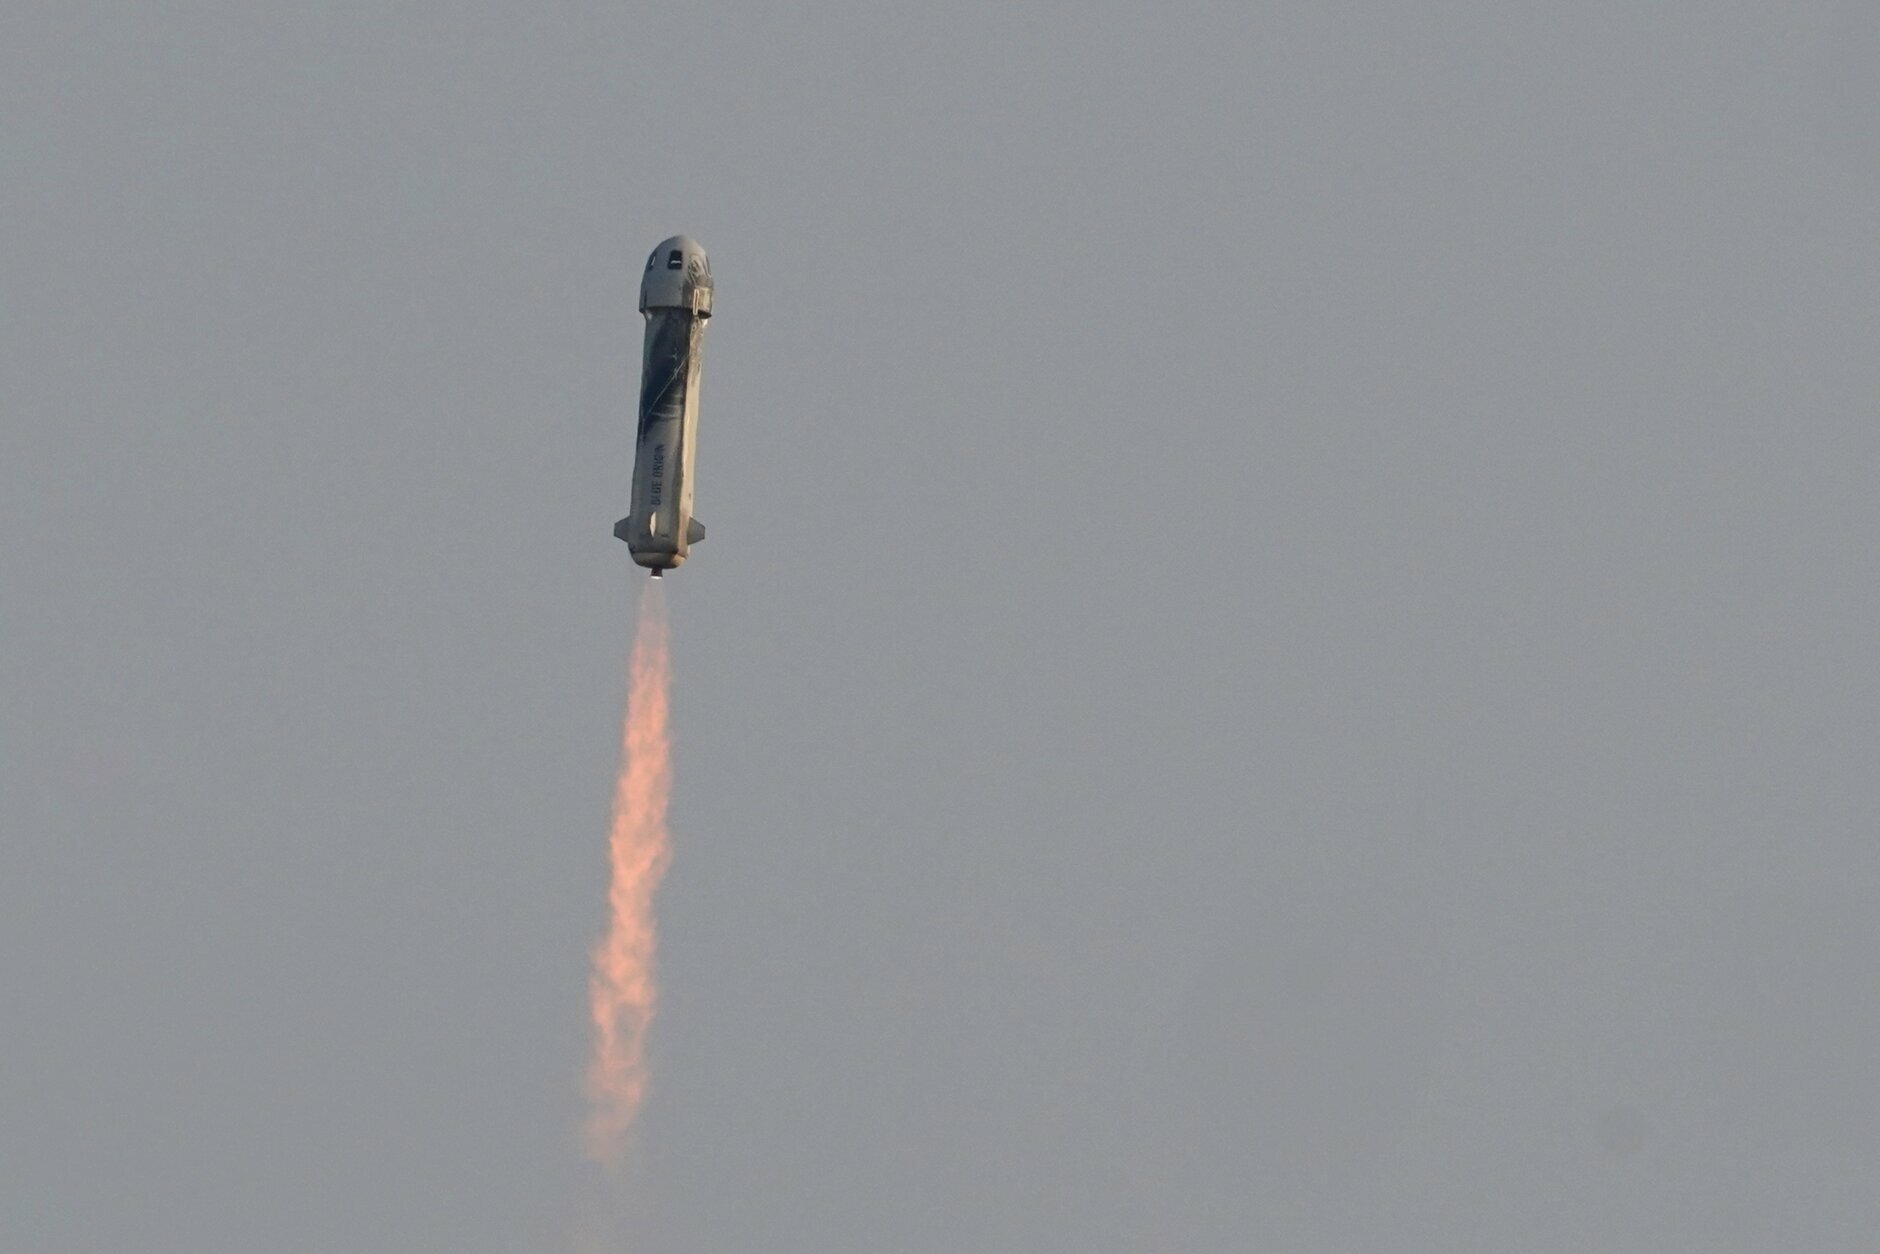 Jeff Bezos blasts into space on own rocket: 'Best day ever!' - WTOP News